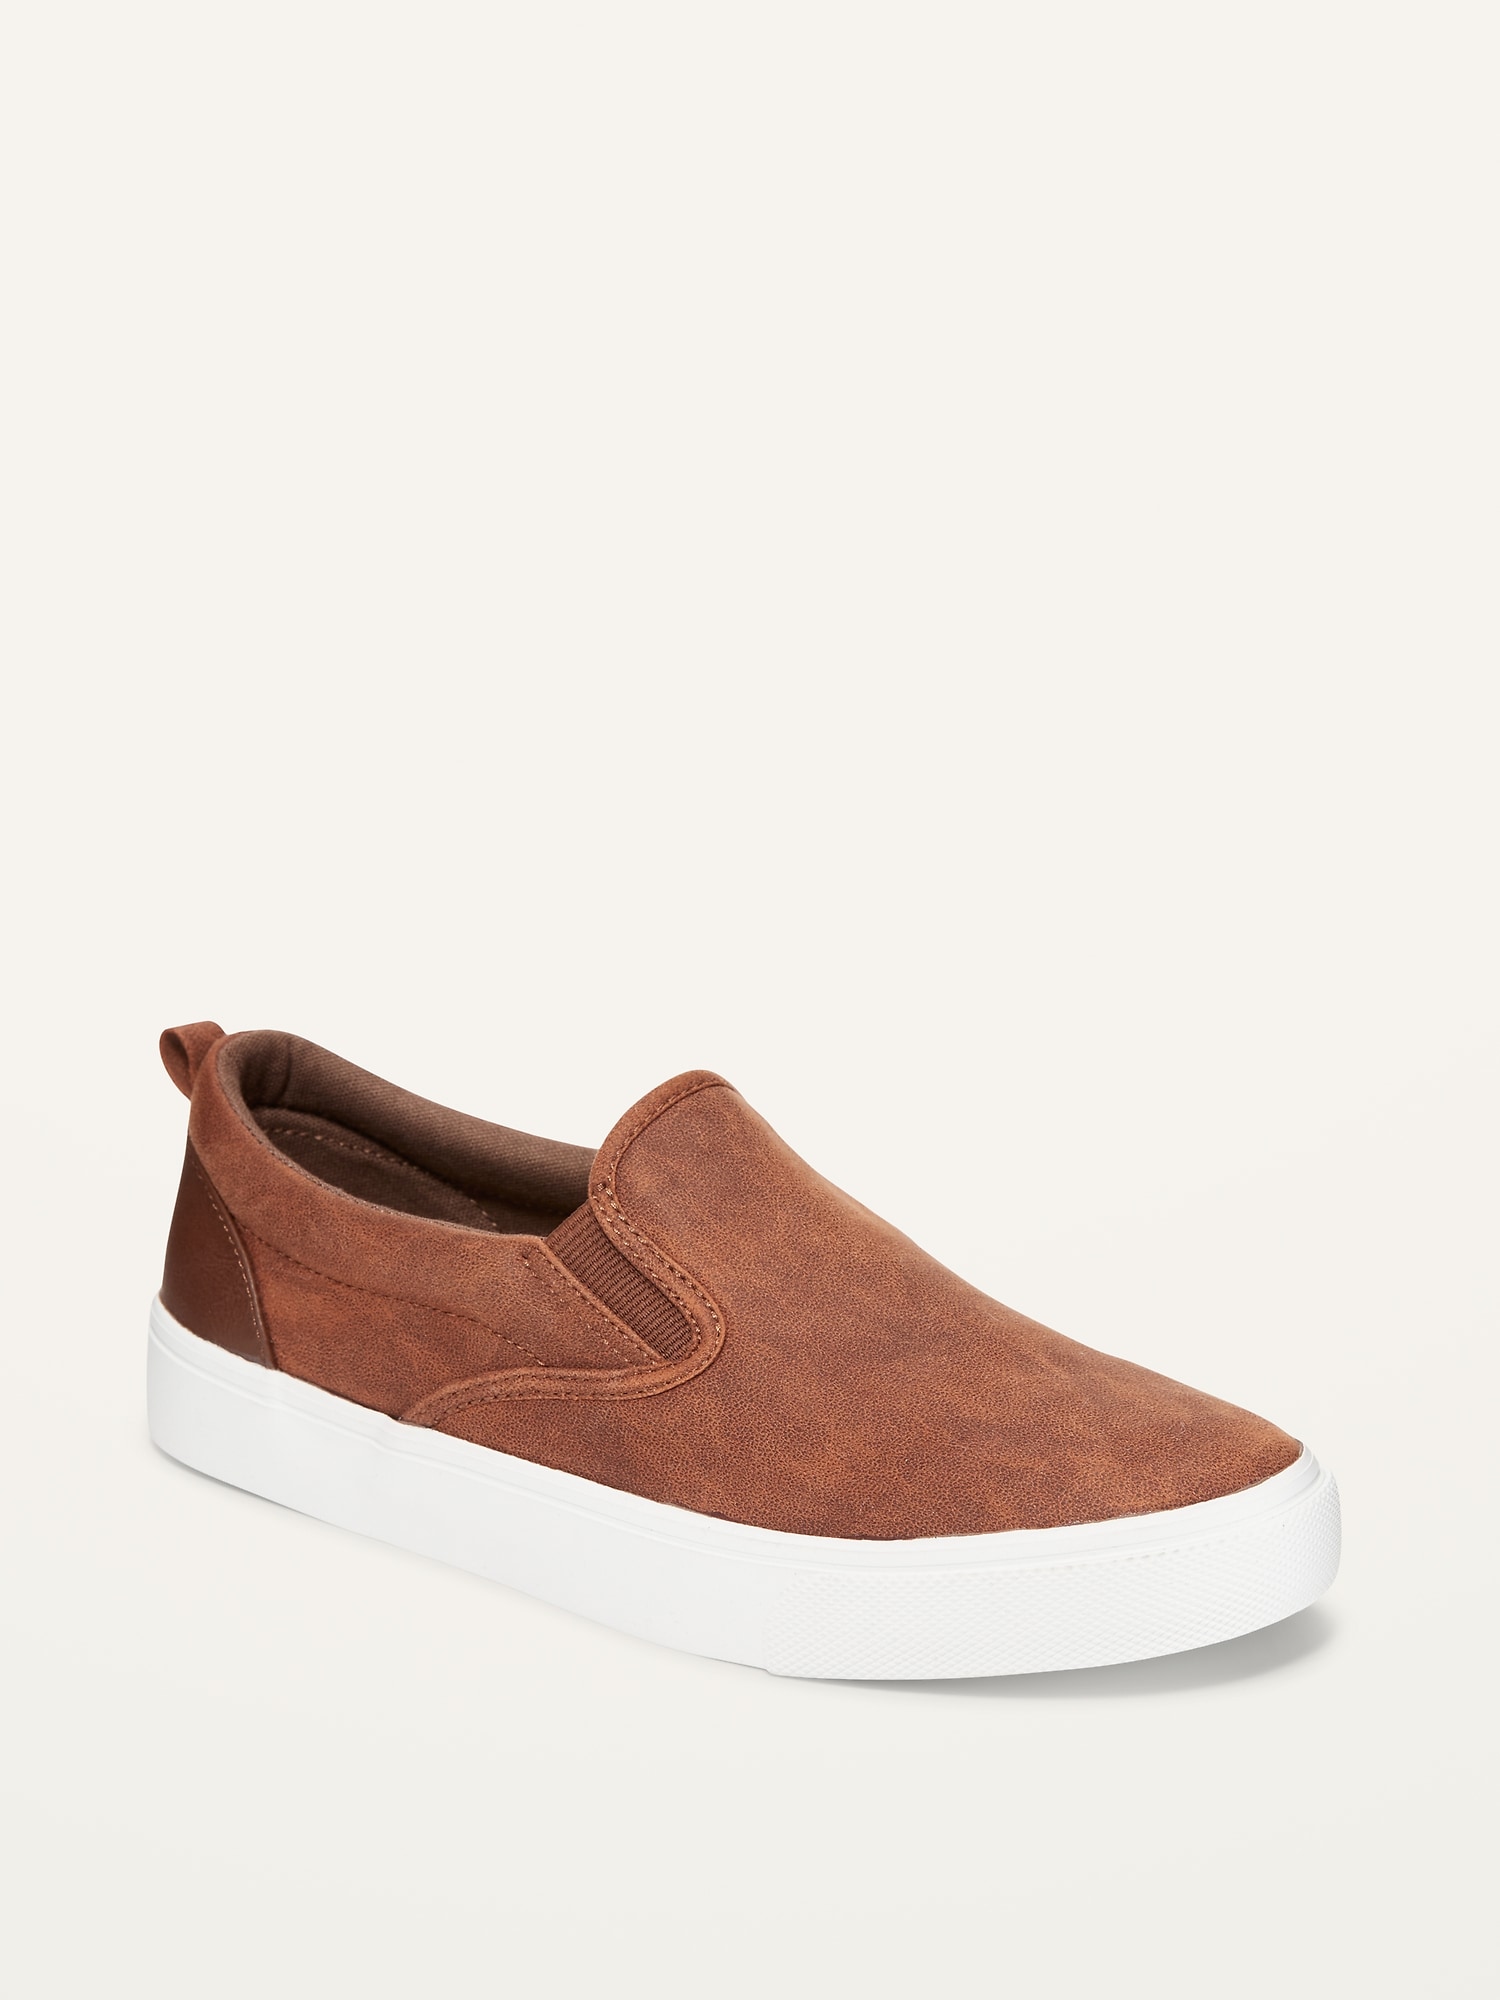 Gender-Neutral Canvas Slip-On Sneakers for Kids | Old Navy